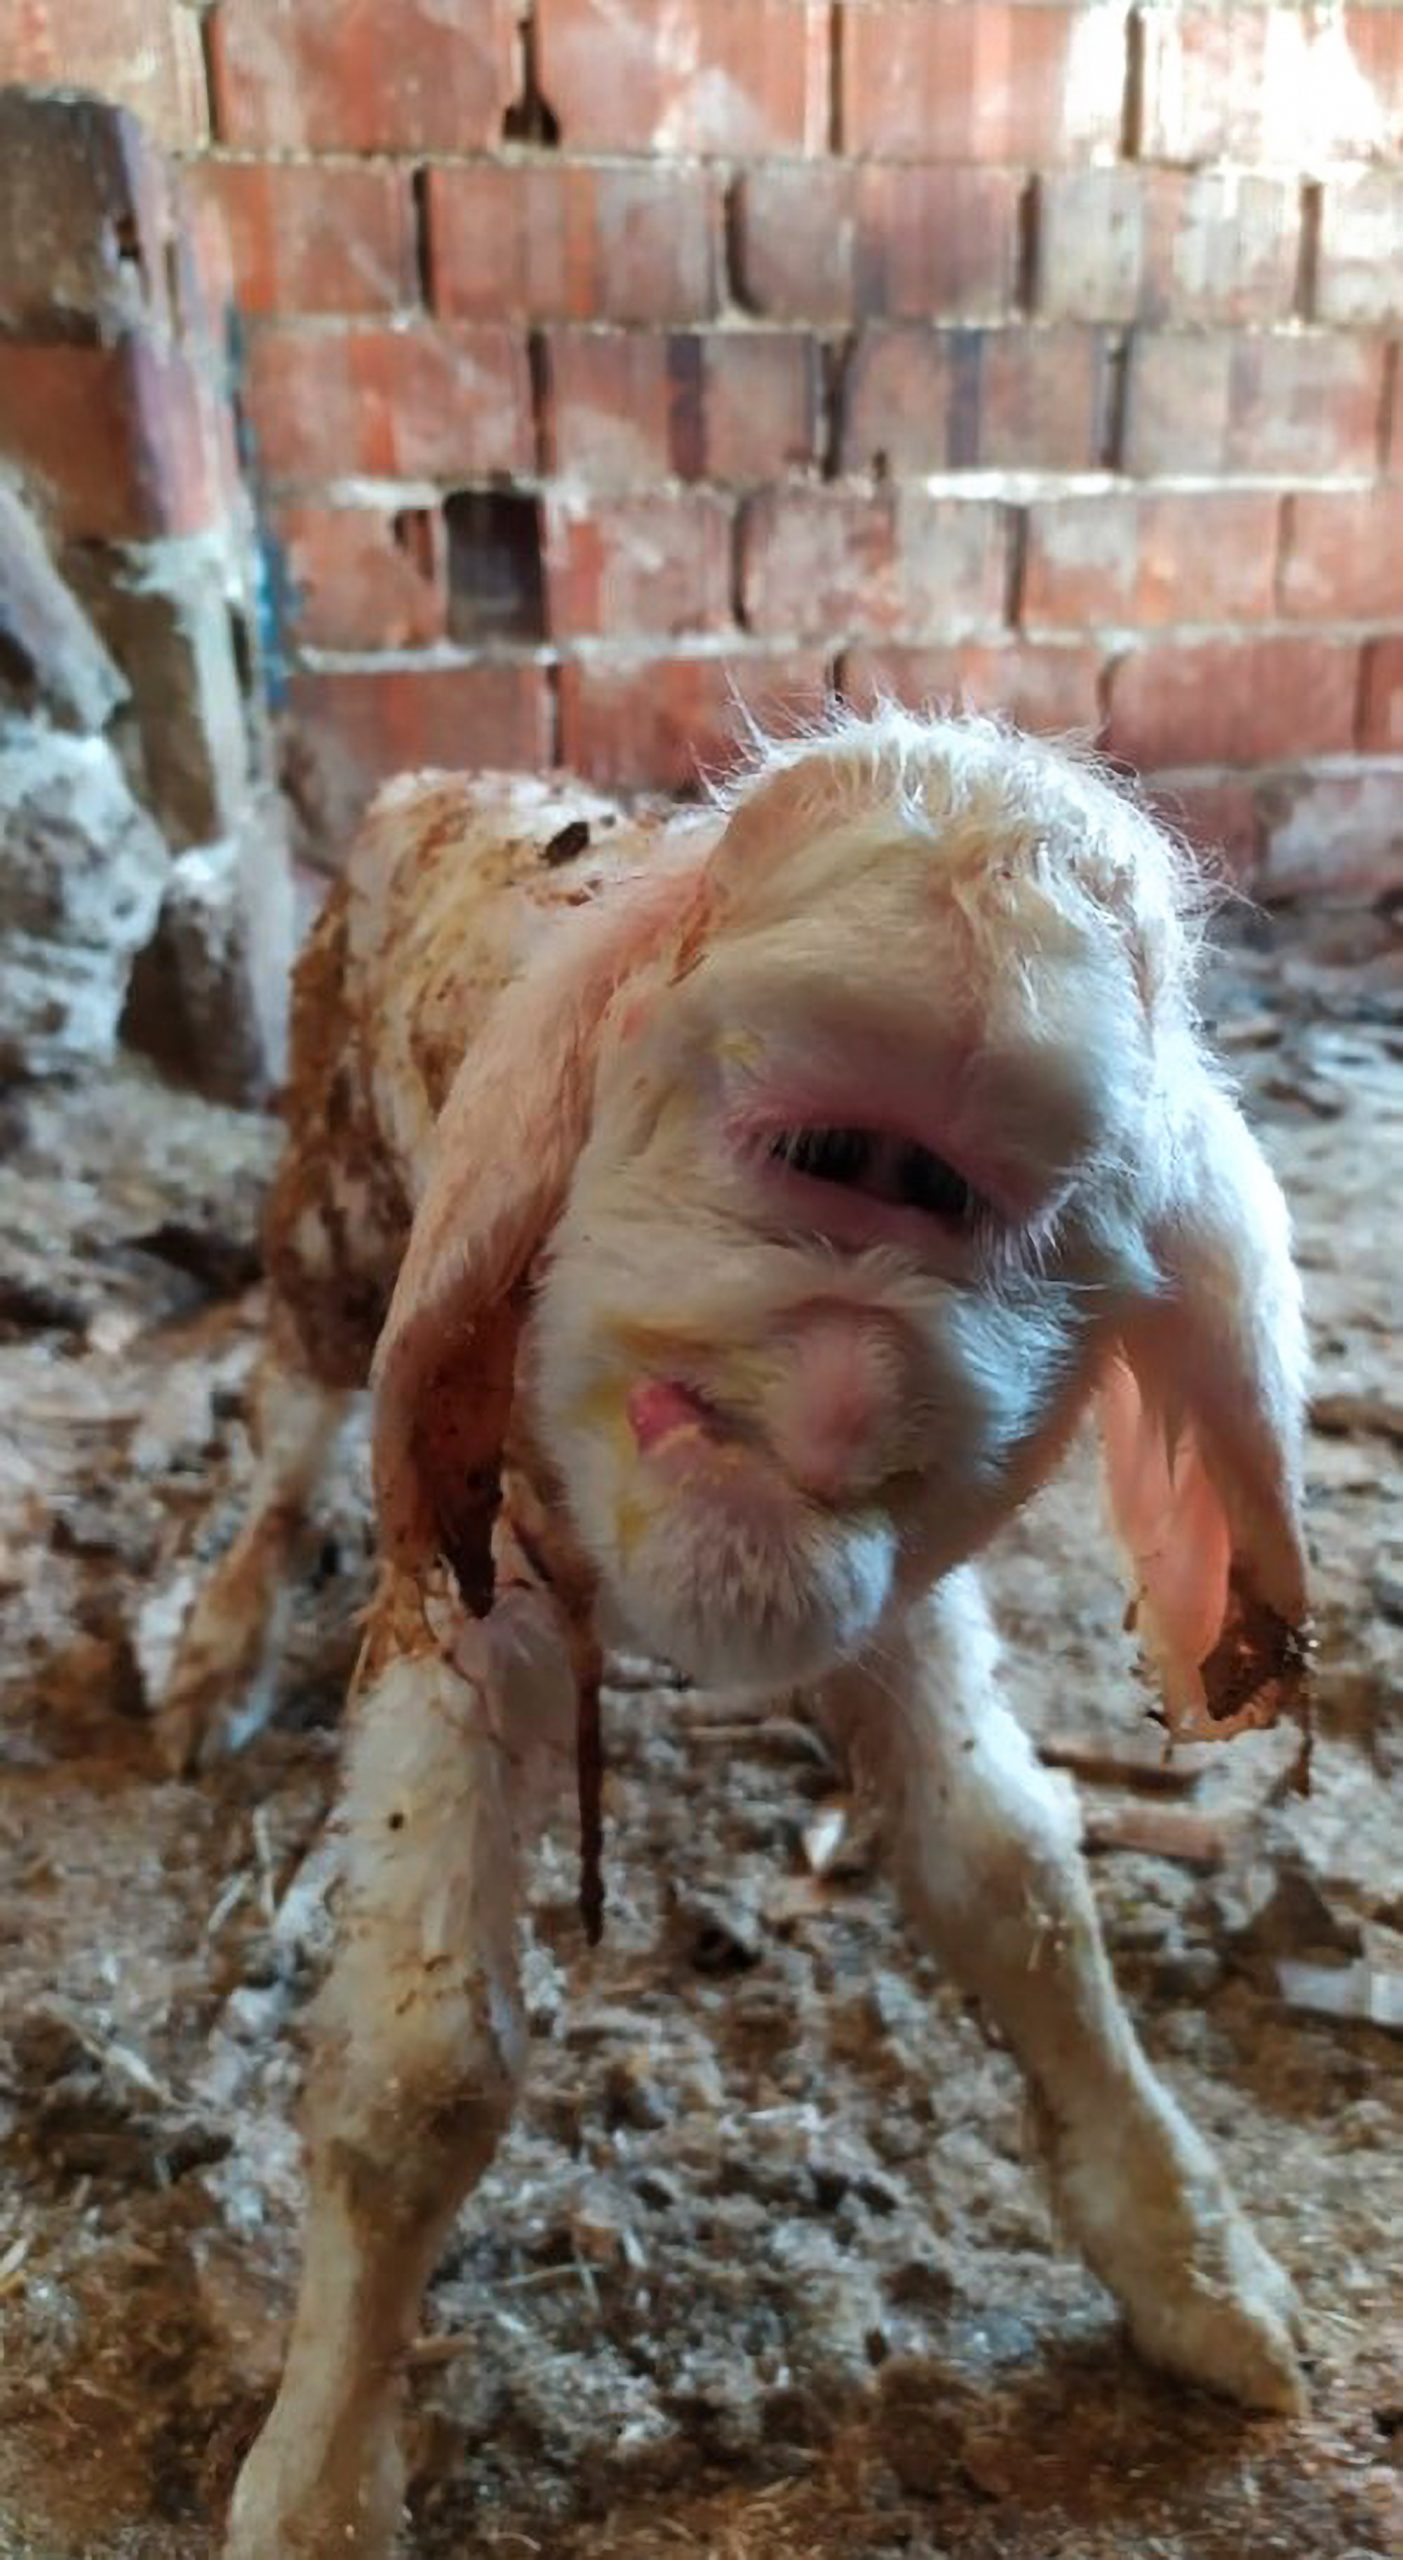 Read more about the article Mutant Lamb Born With No Nostrils And Human-Like Face